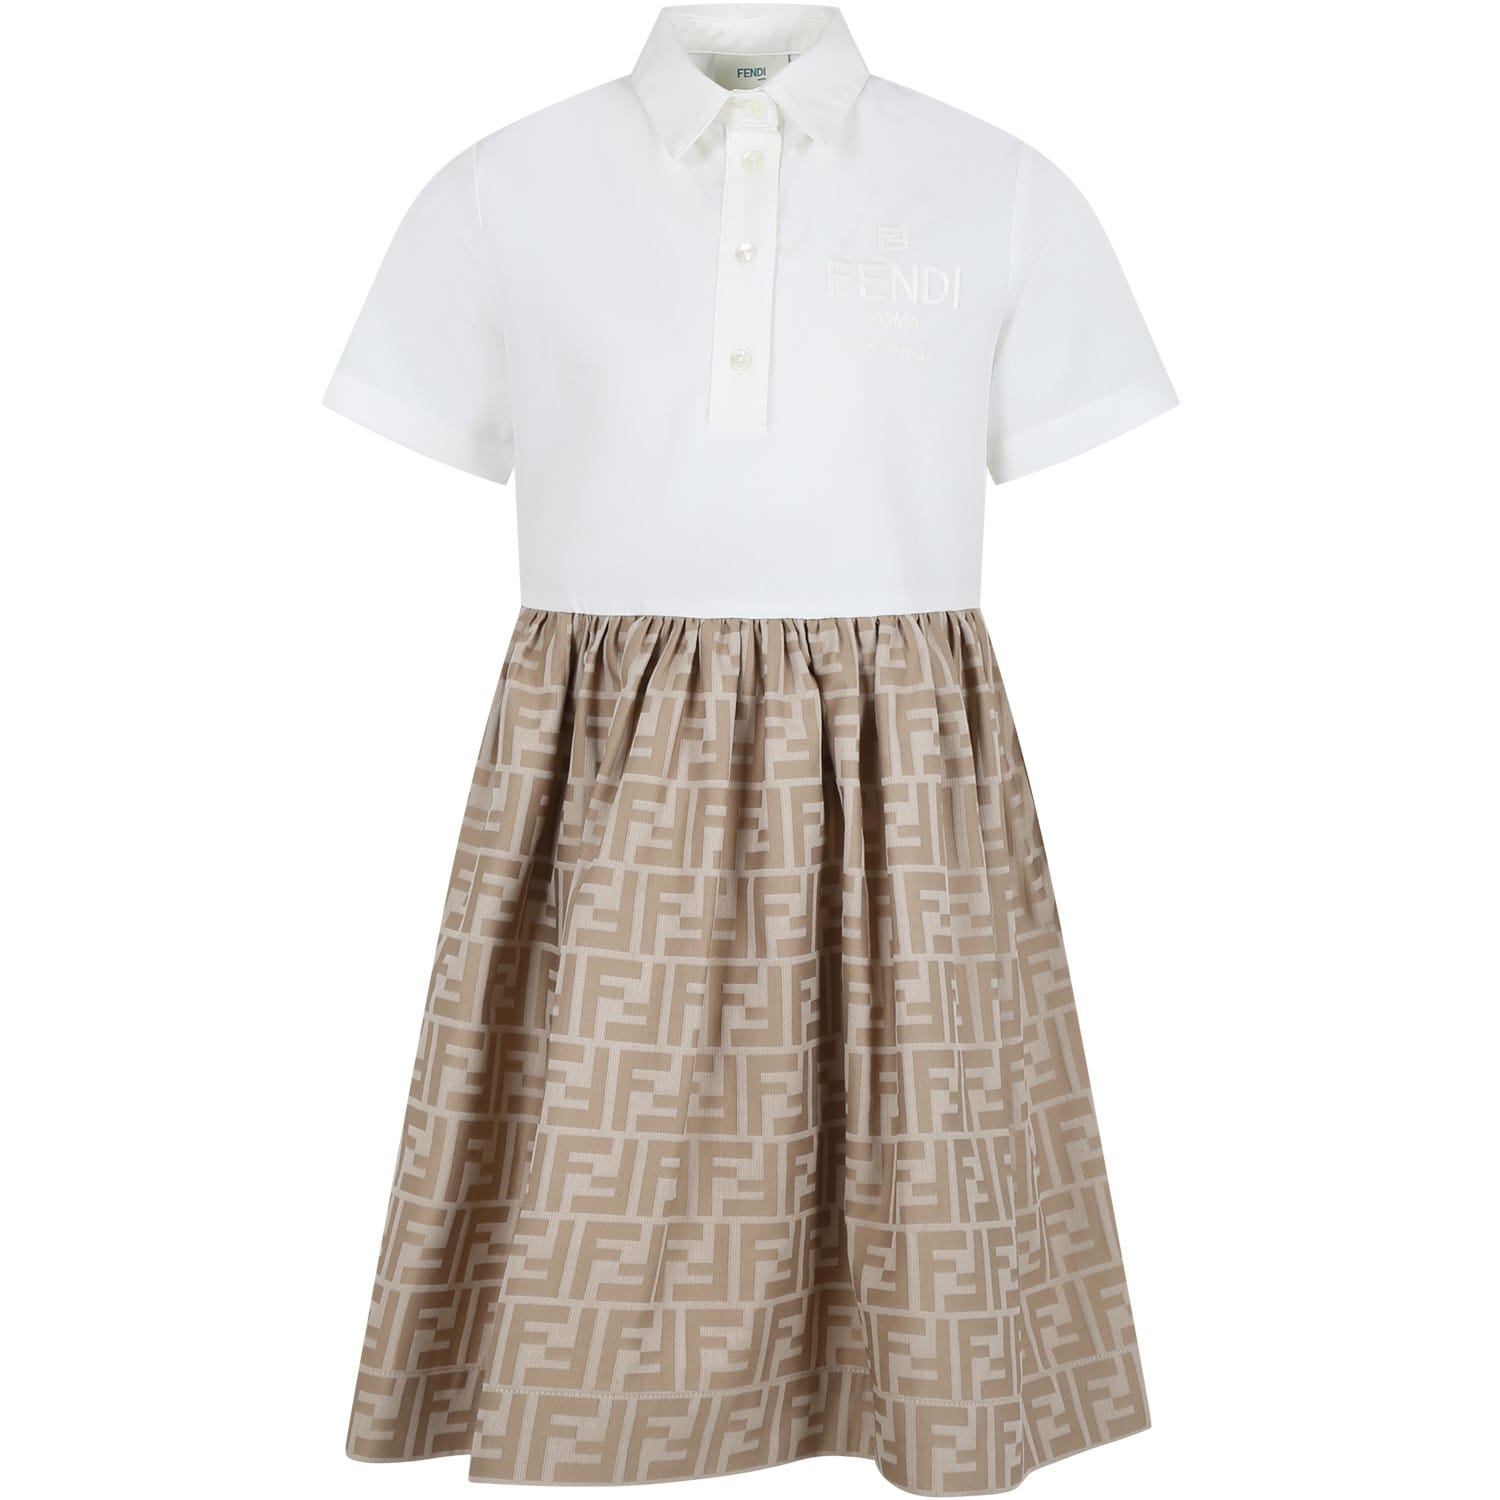 Fendi Kids' Multicolor Dress For Girl With Iconic Ff